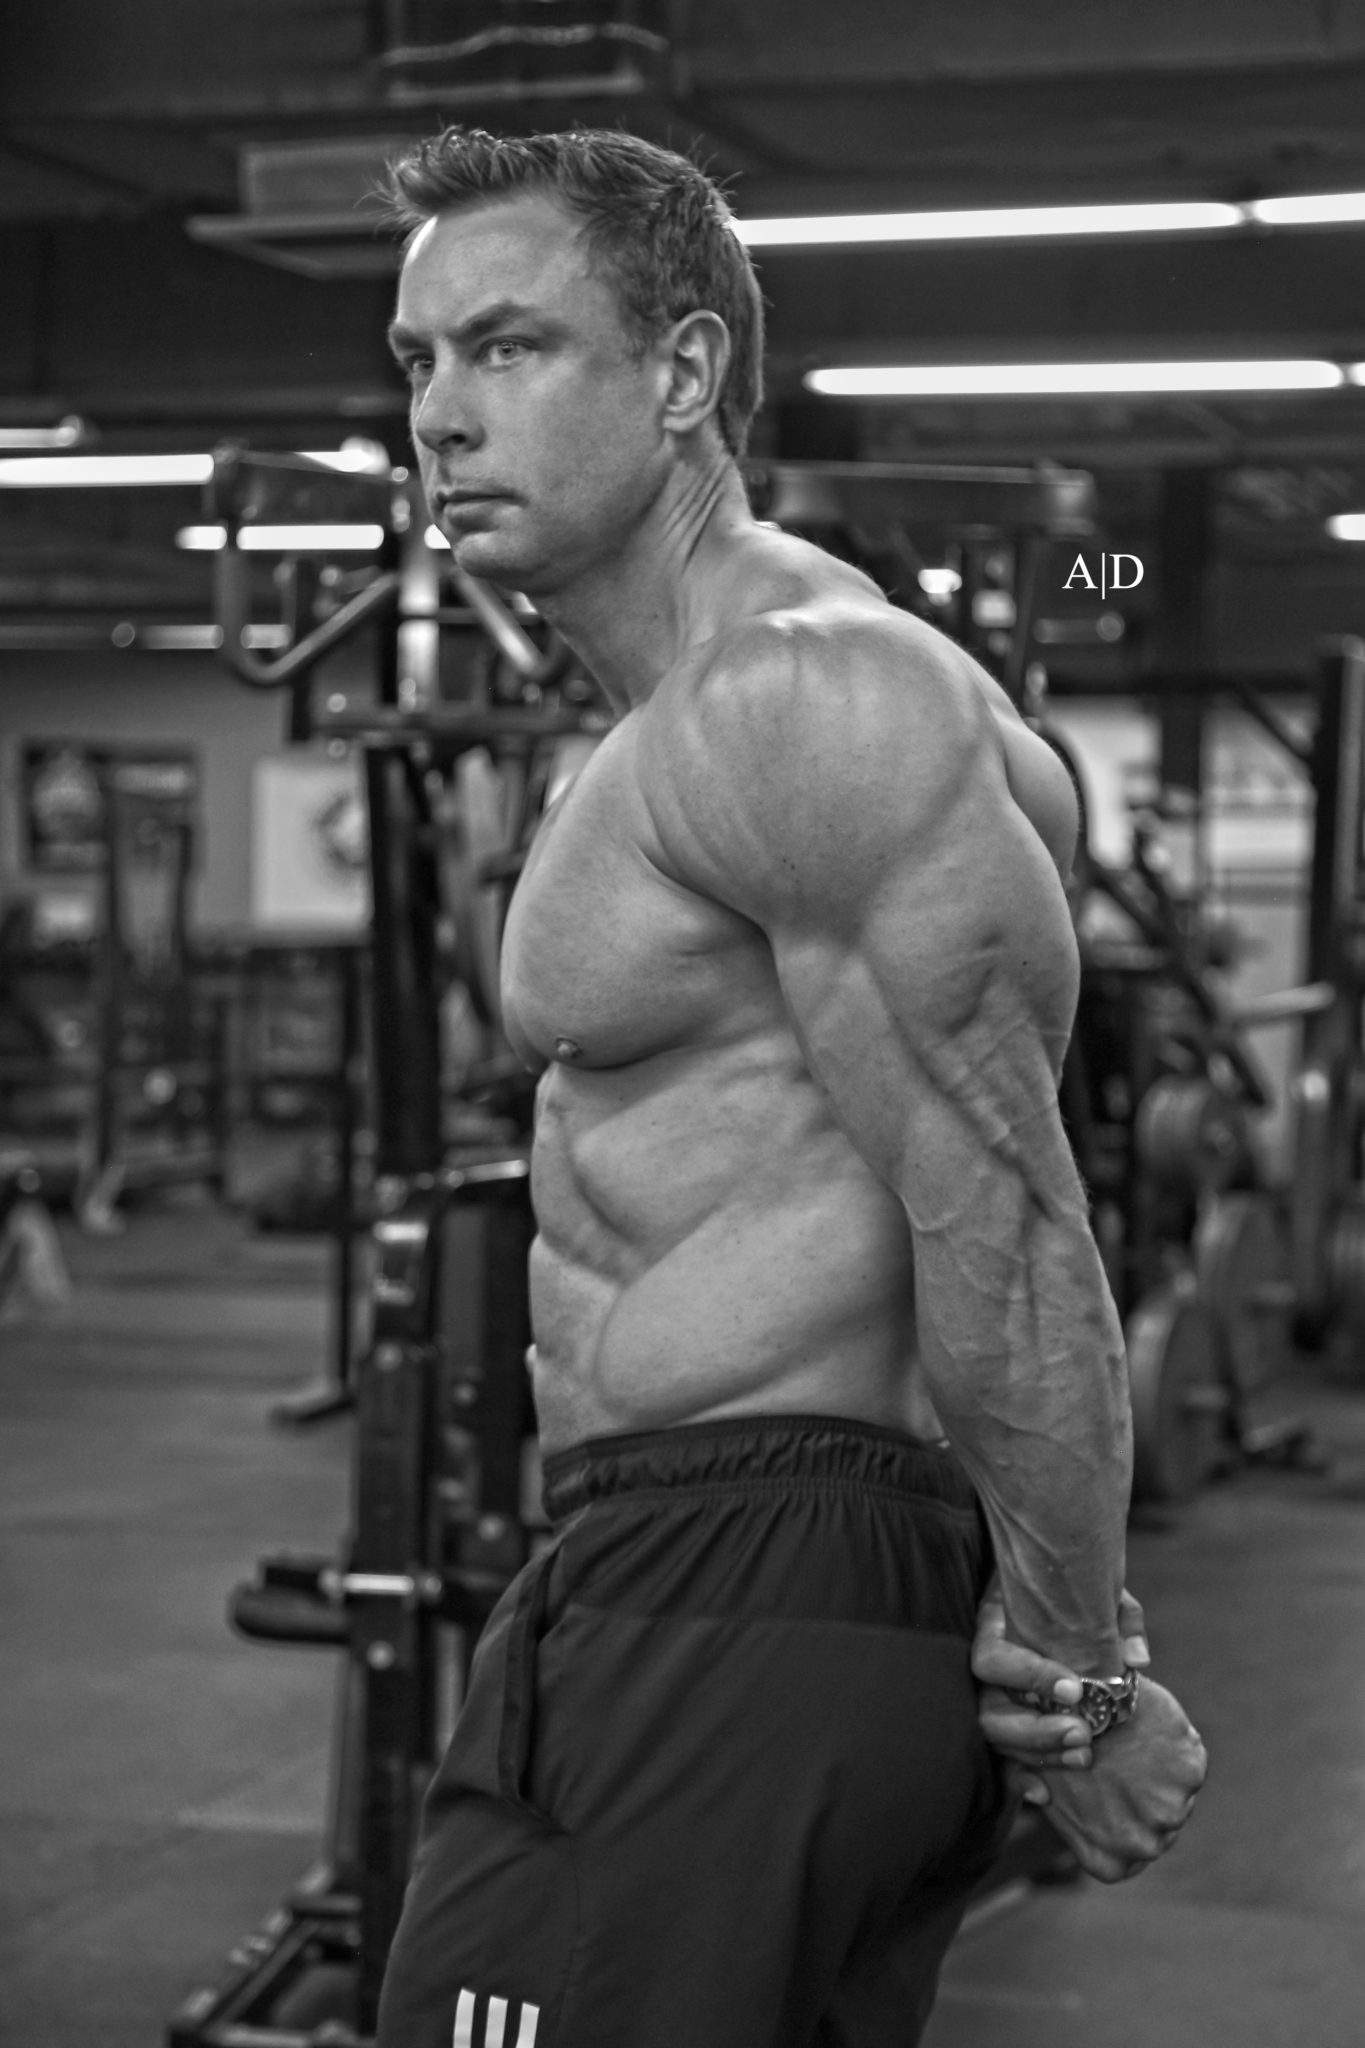 Load vs tension – which one matters for muscle growth?